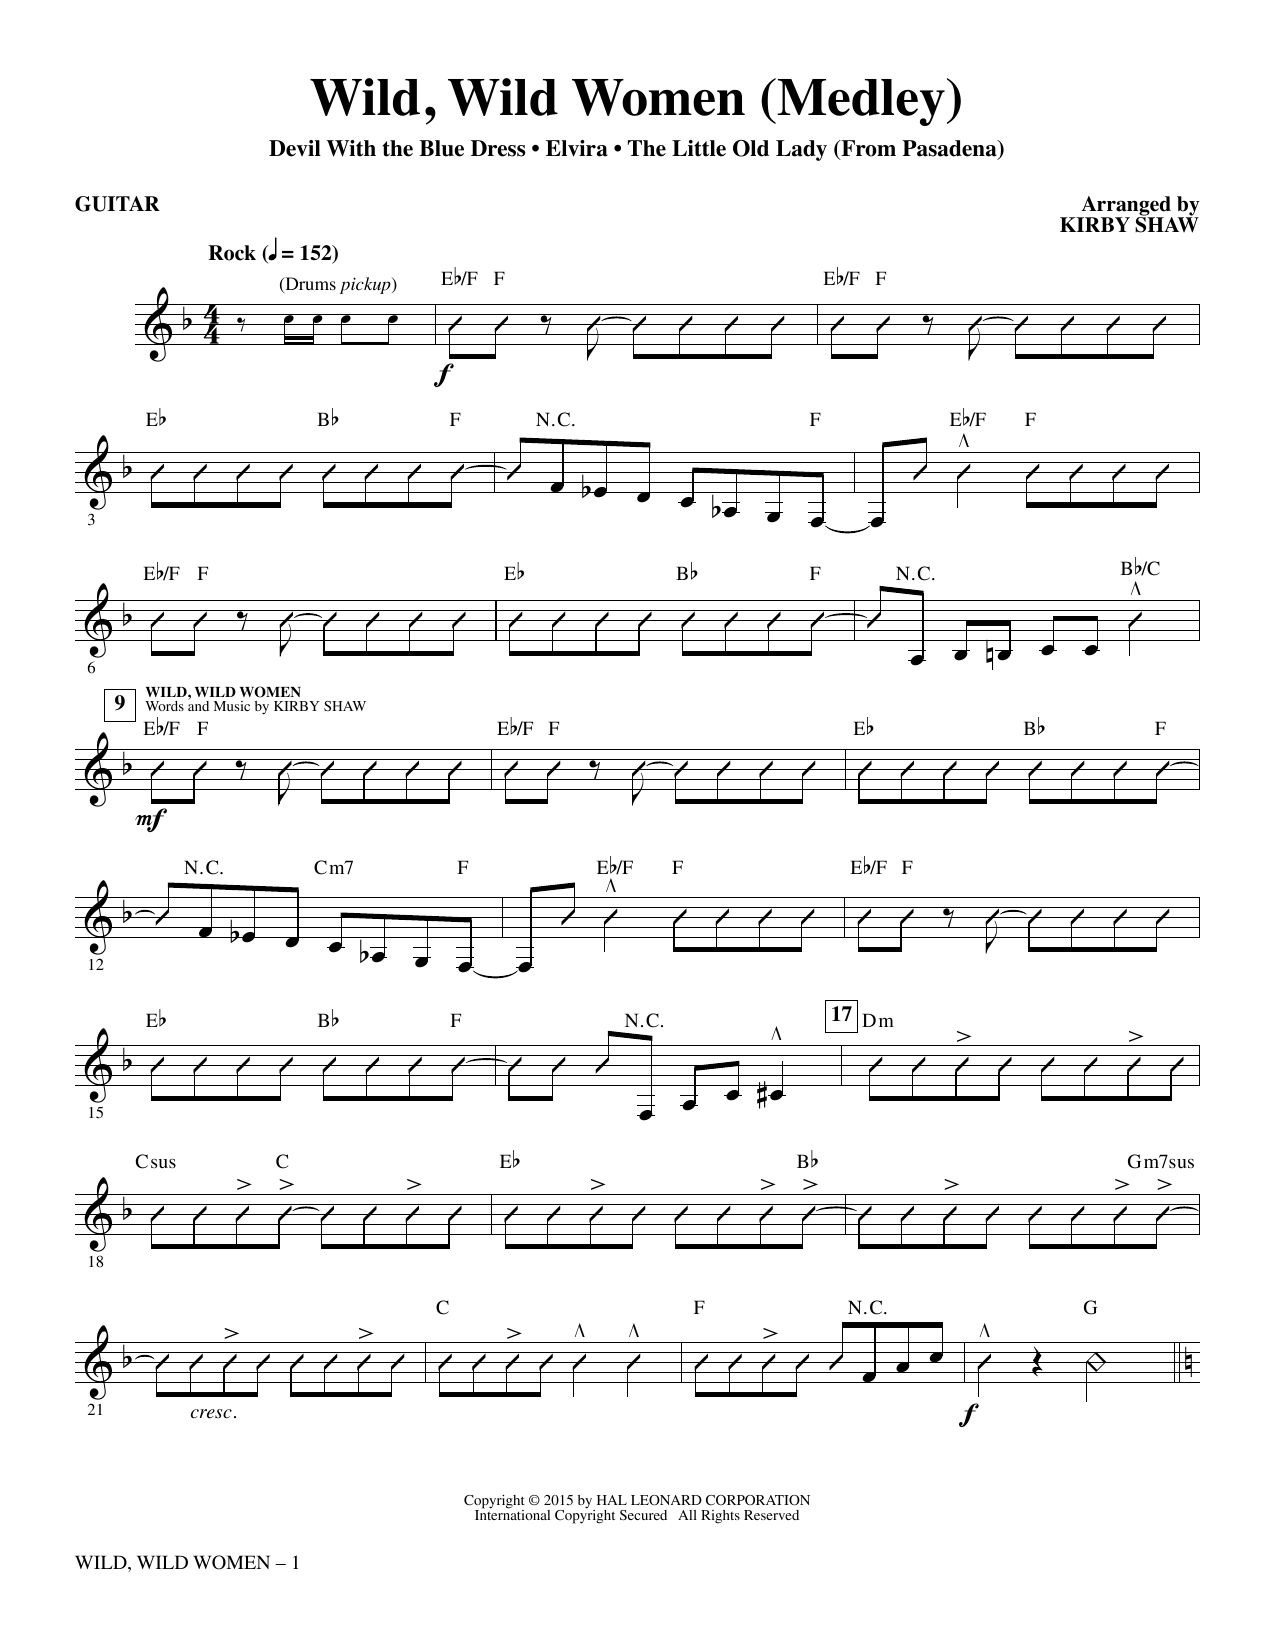 Kirby Shaw Wild, Wild Women - Guitar sheet music notes and chords. Download Printable PDF.